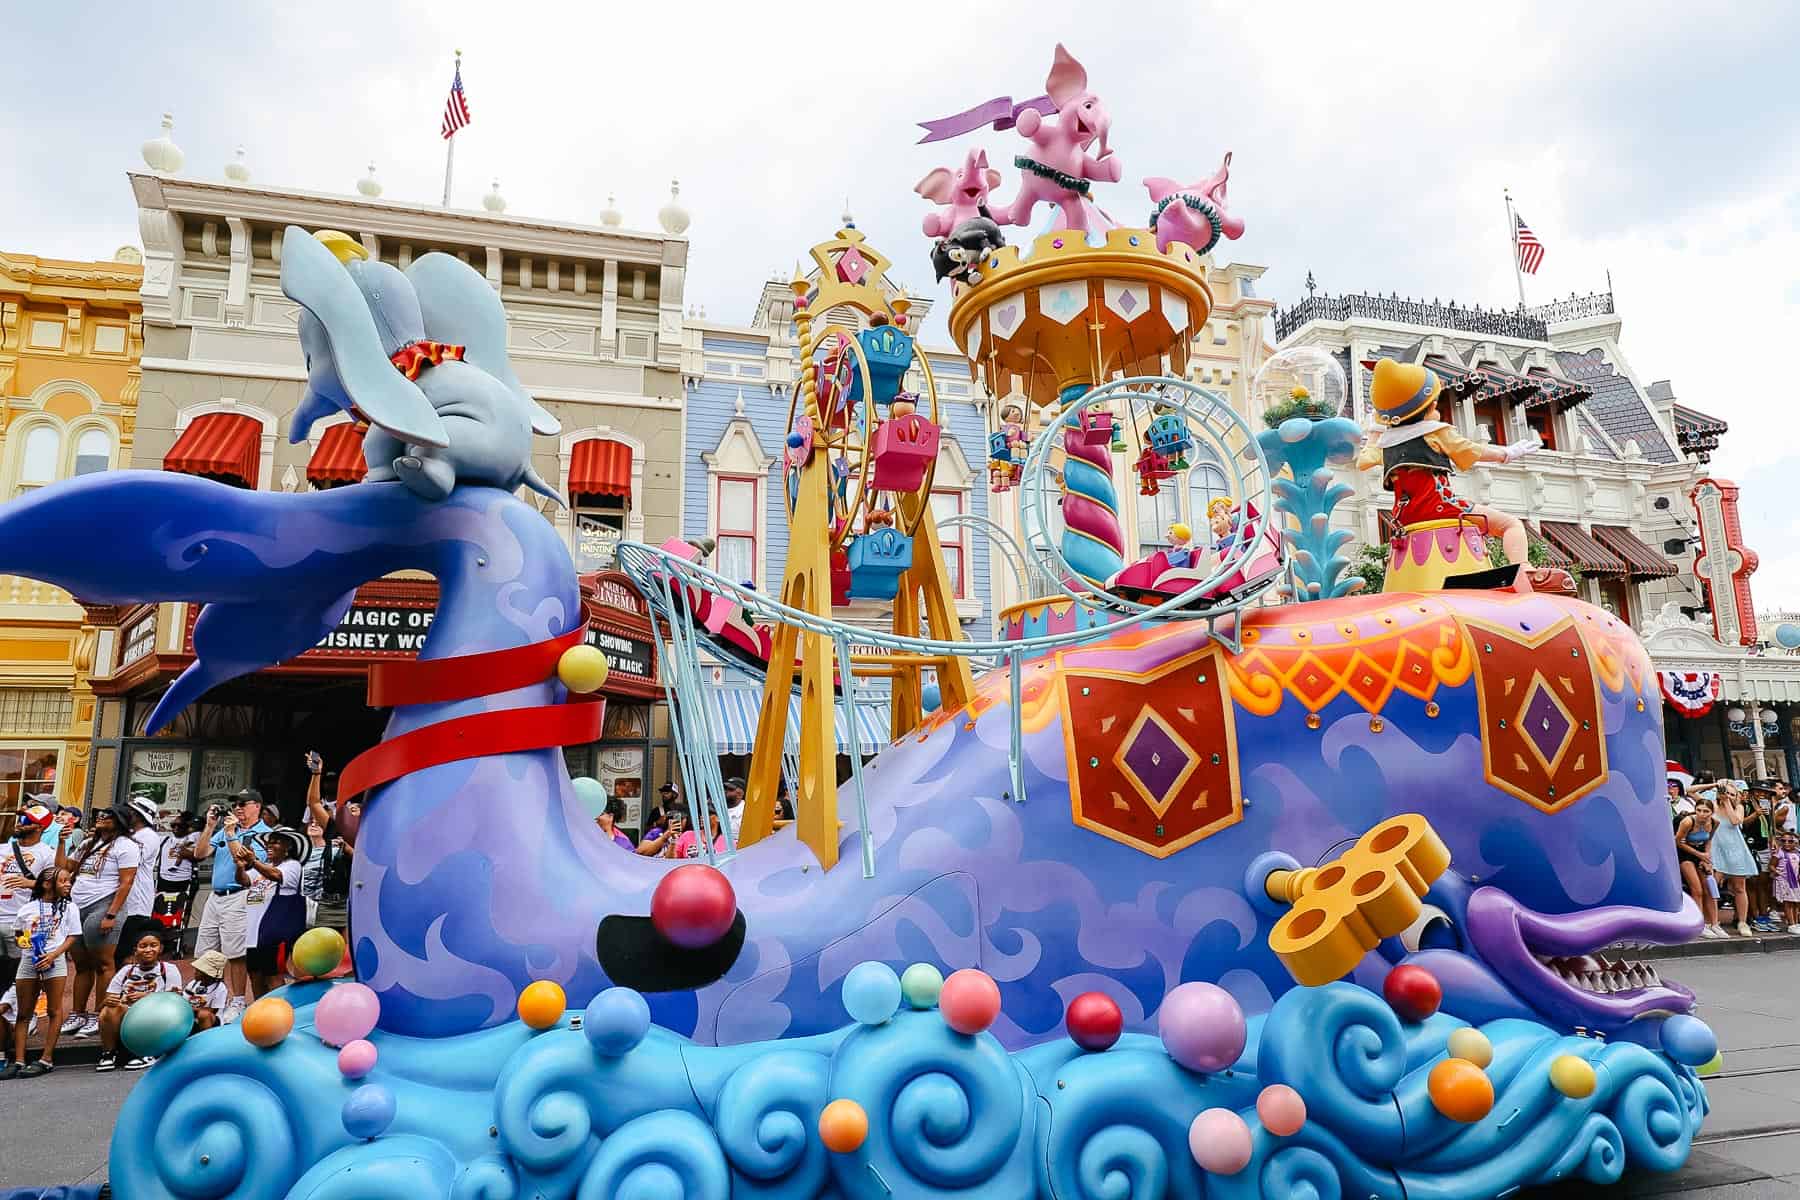 Dumbo rides on the whale's tail in the parade at Magic Kingdom. 